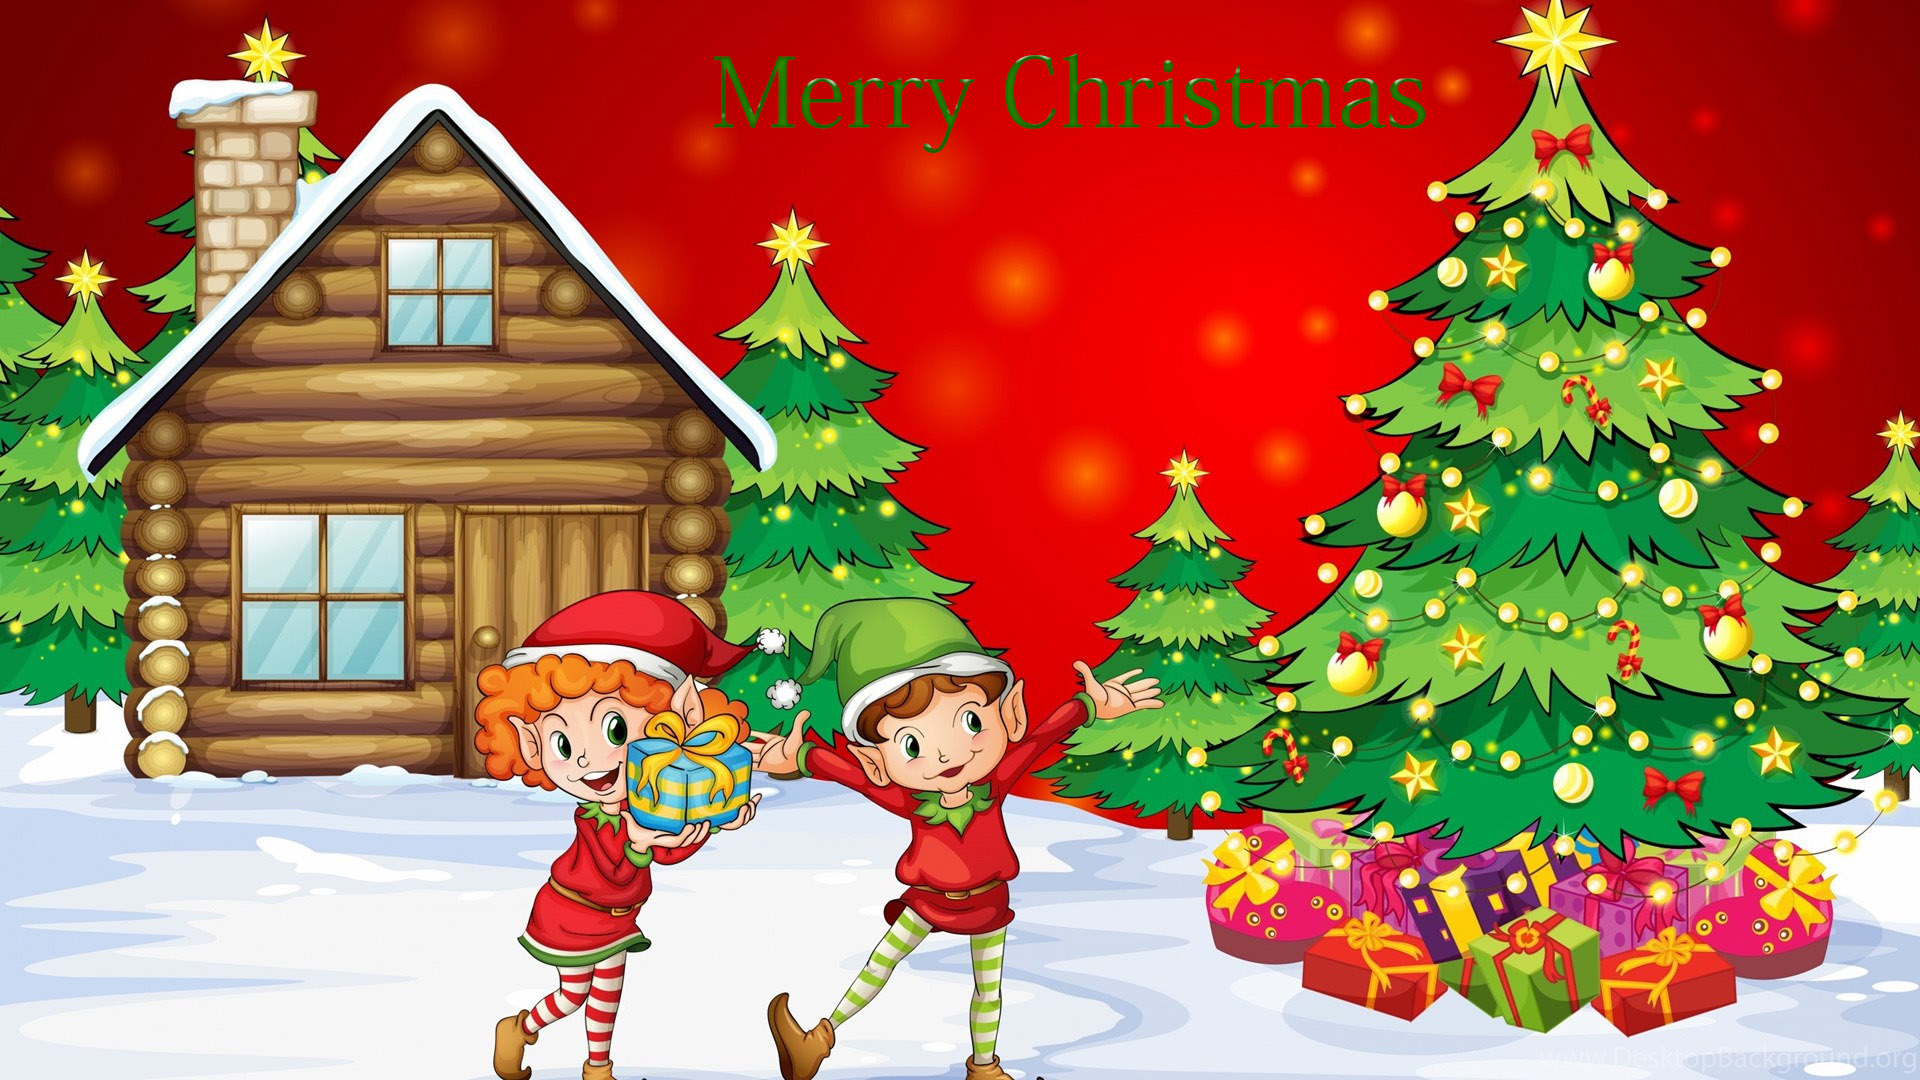 Merry Christmas Quotes And Images